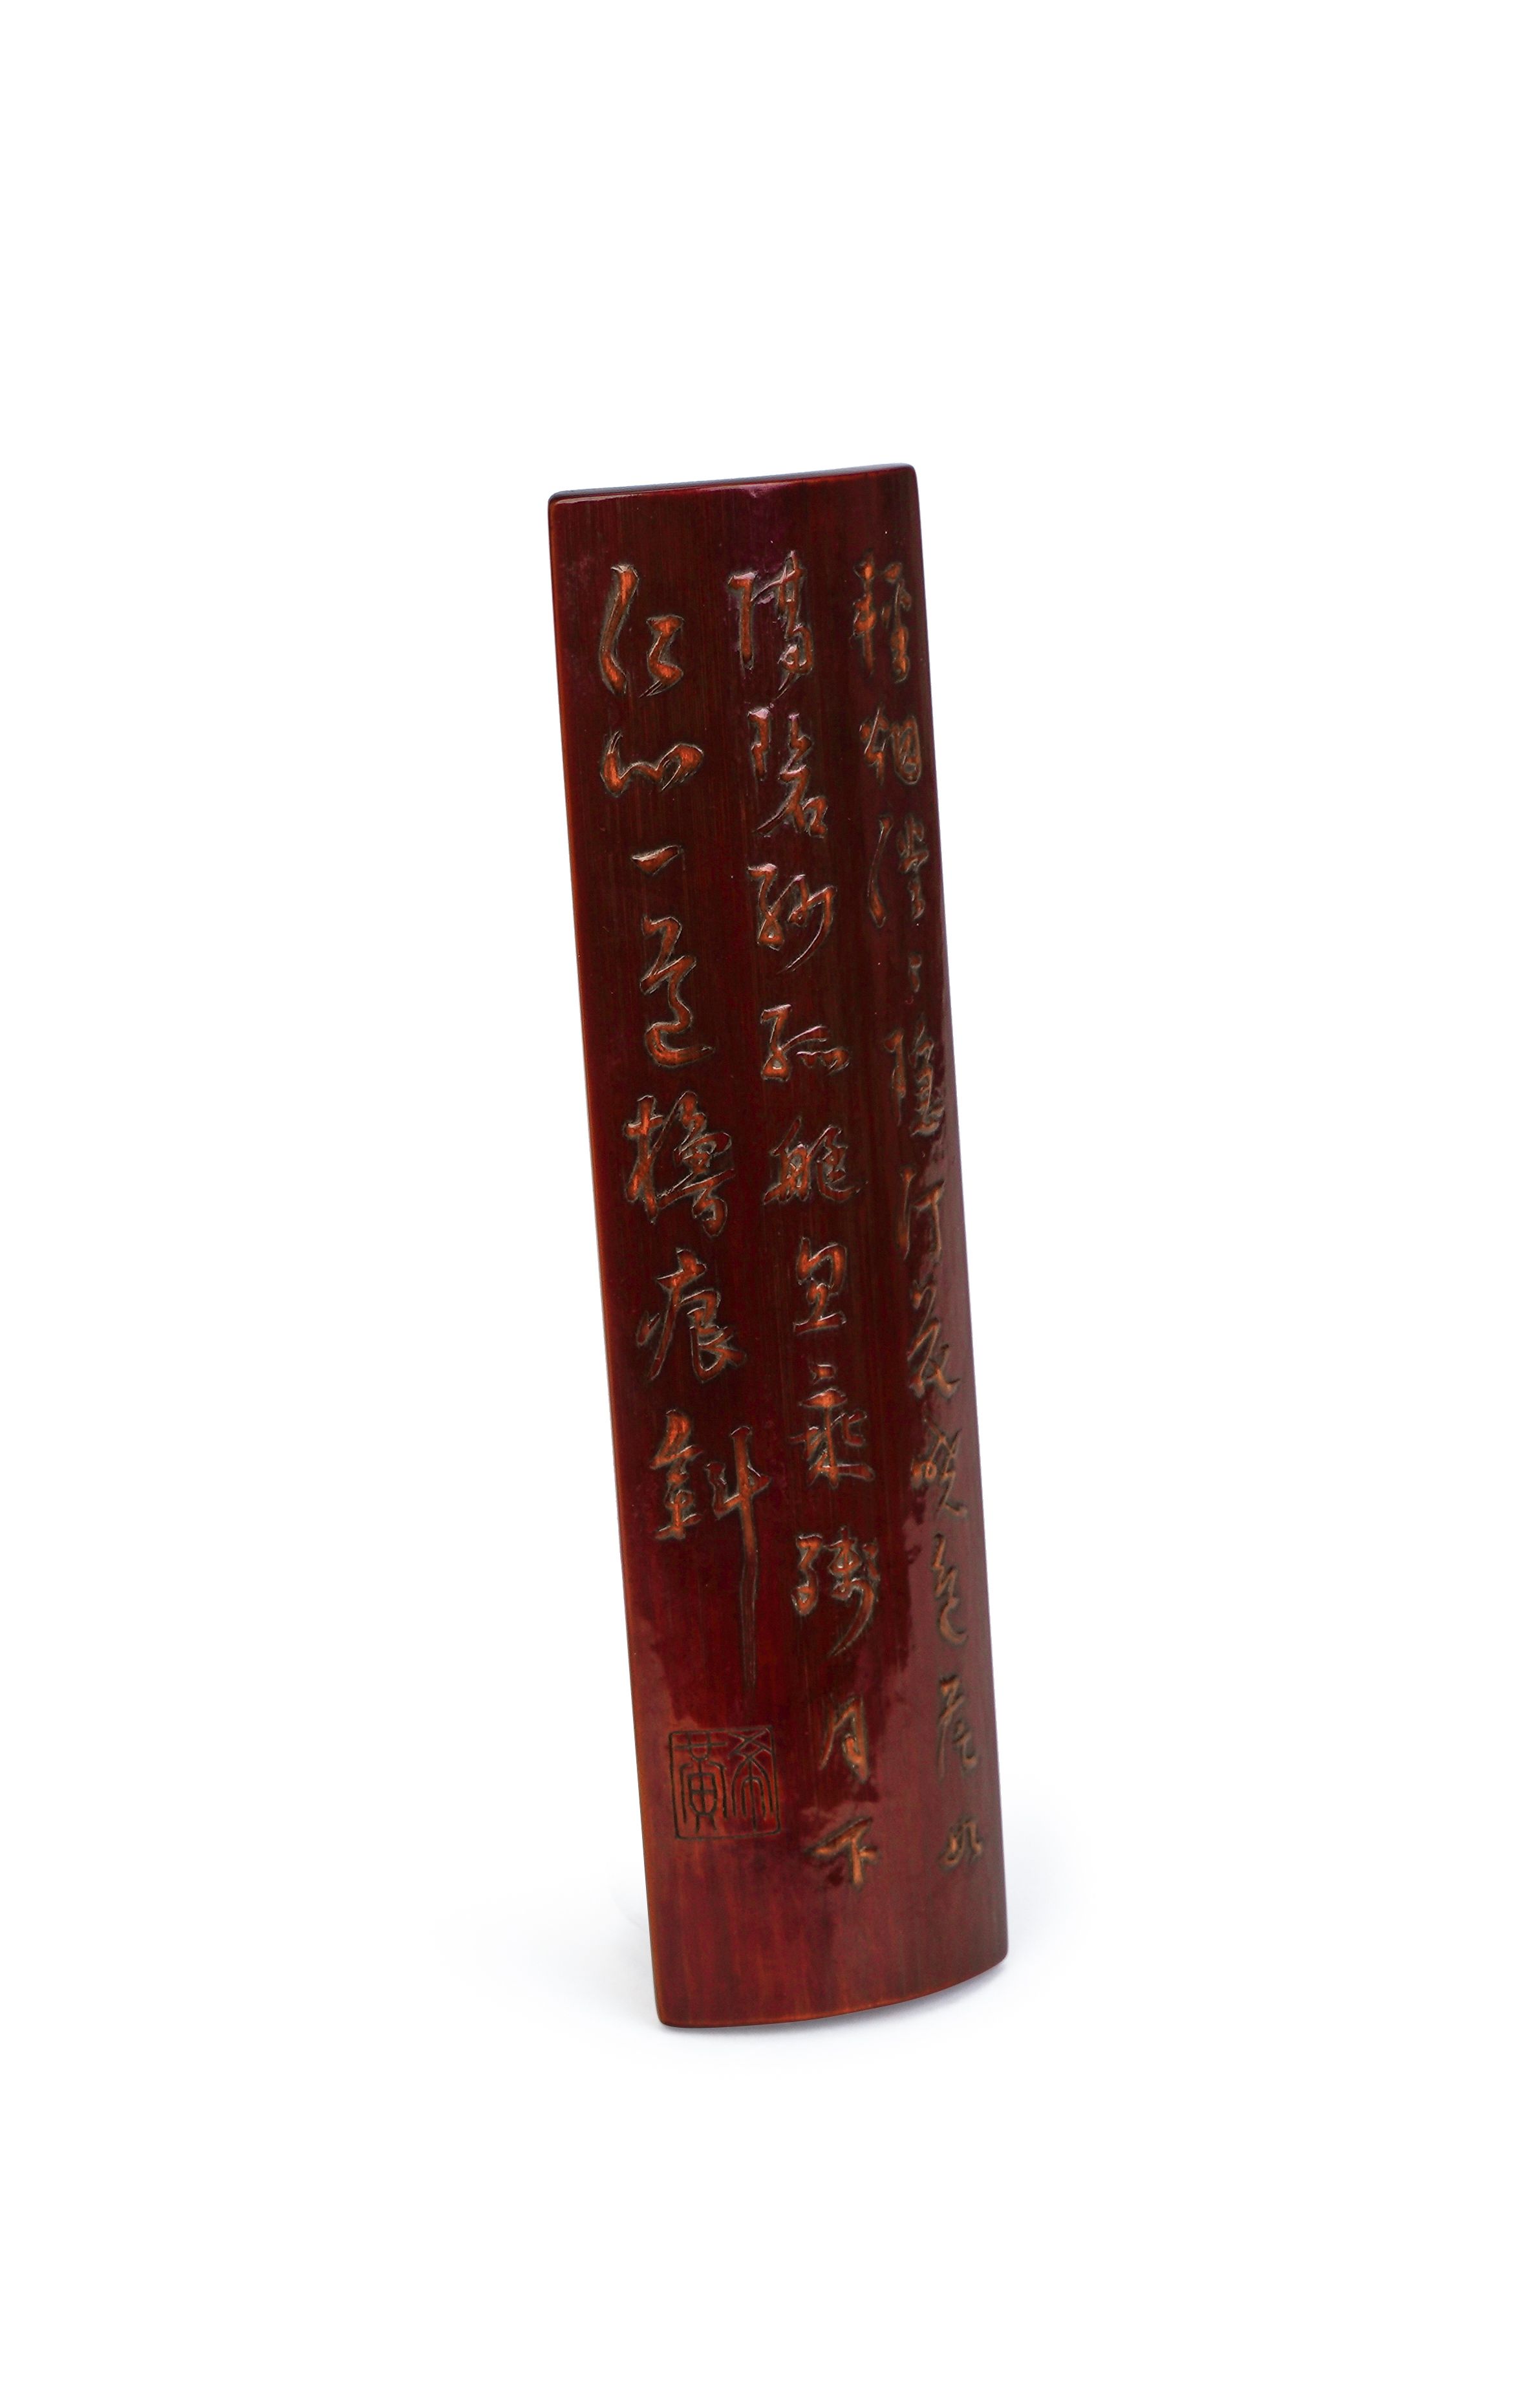 AN INSCRIBED CHINESE BAMBOO BRUSH REST, 17TH CENTURY, KANGXI PERIOD (1662-1722) - Image 8 of 11